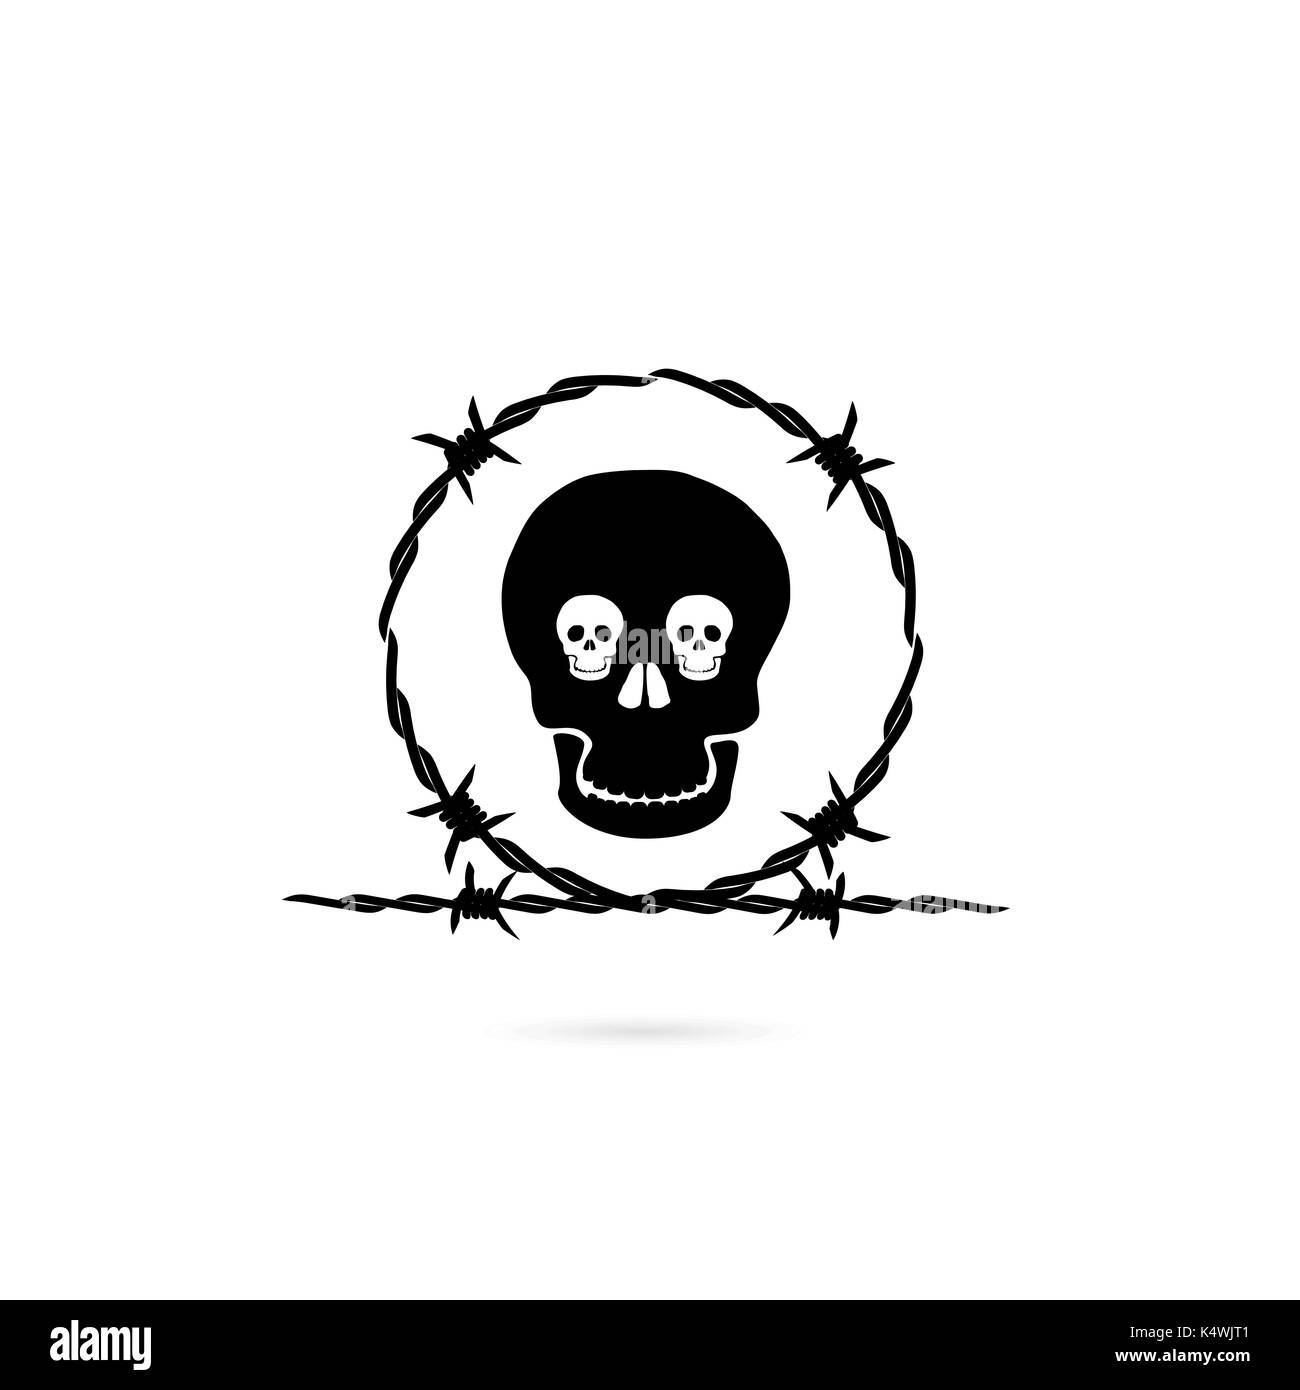 Human skull silhouettes and barbed wire icon. Human skull and barbed wire tattoo logo design vector template.Skull front face logo.Vector illustration Stock Vector